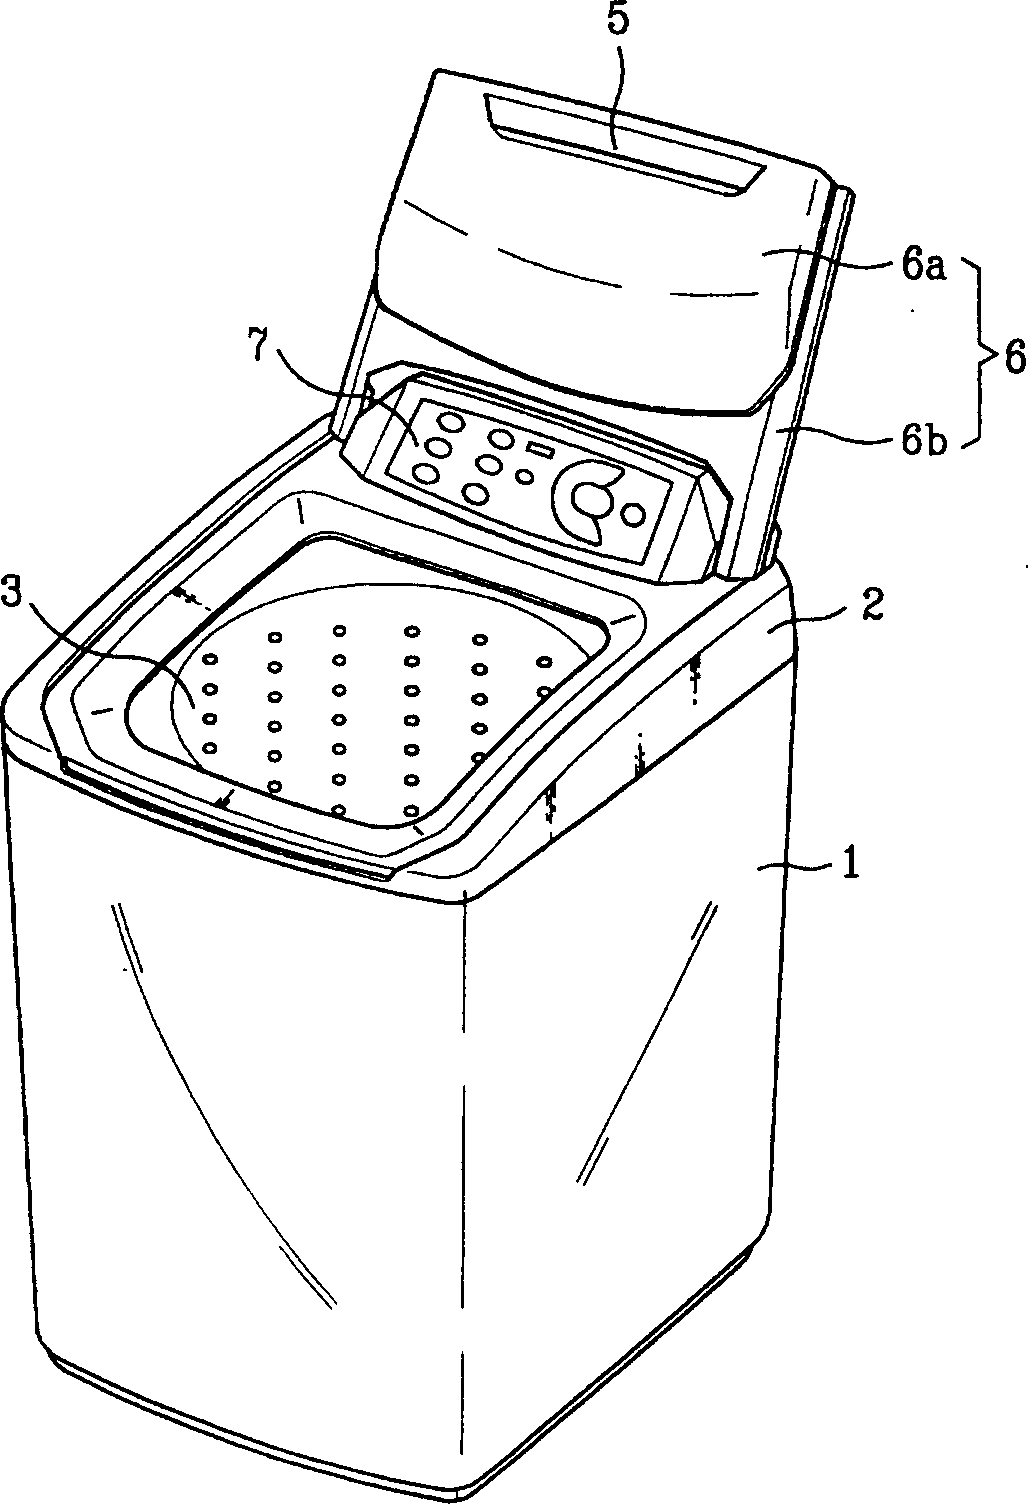 Cover structure for washing machine